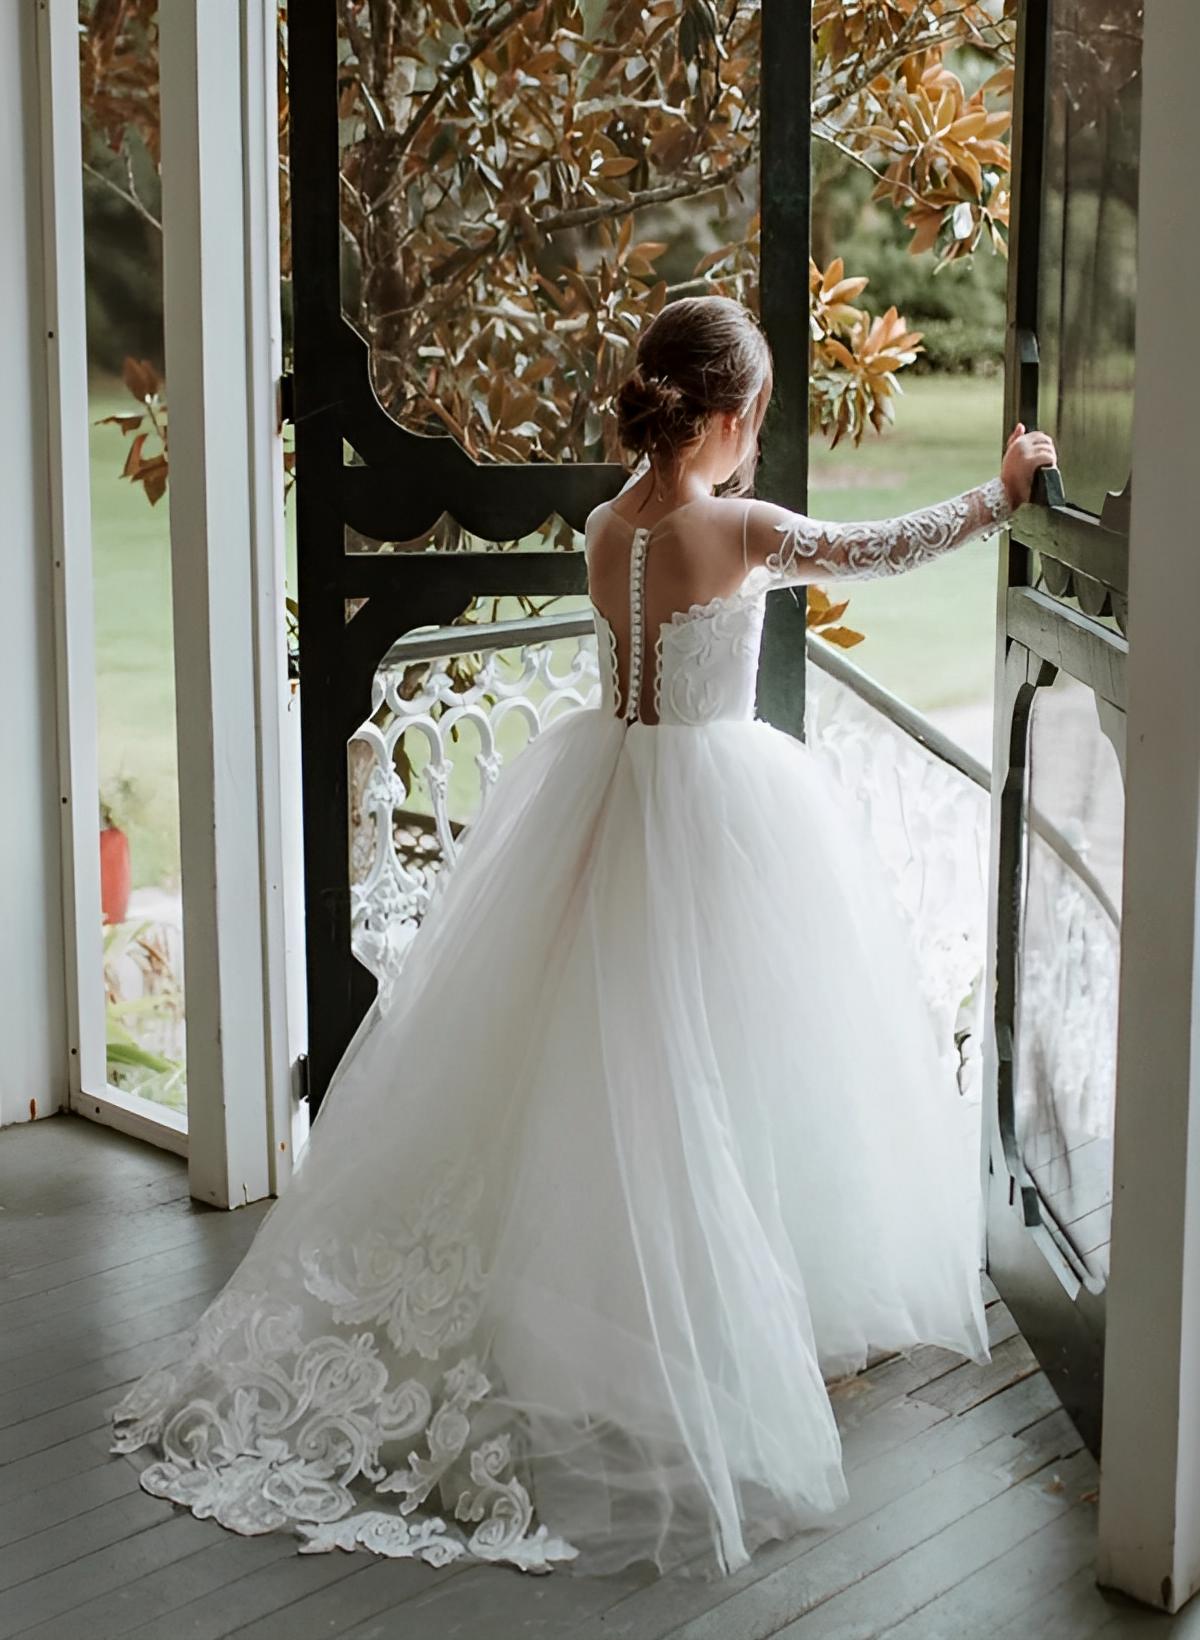 A-Line Illusion Neck Long Sleeves Sweep Train Tulle Flower Girl Dresses With Appliques Lace